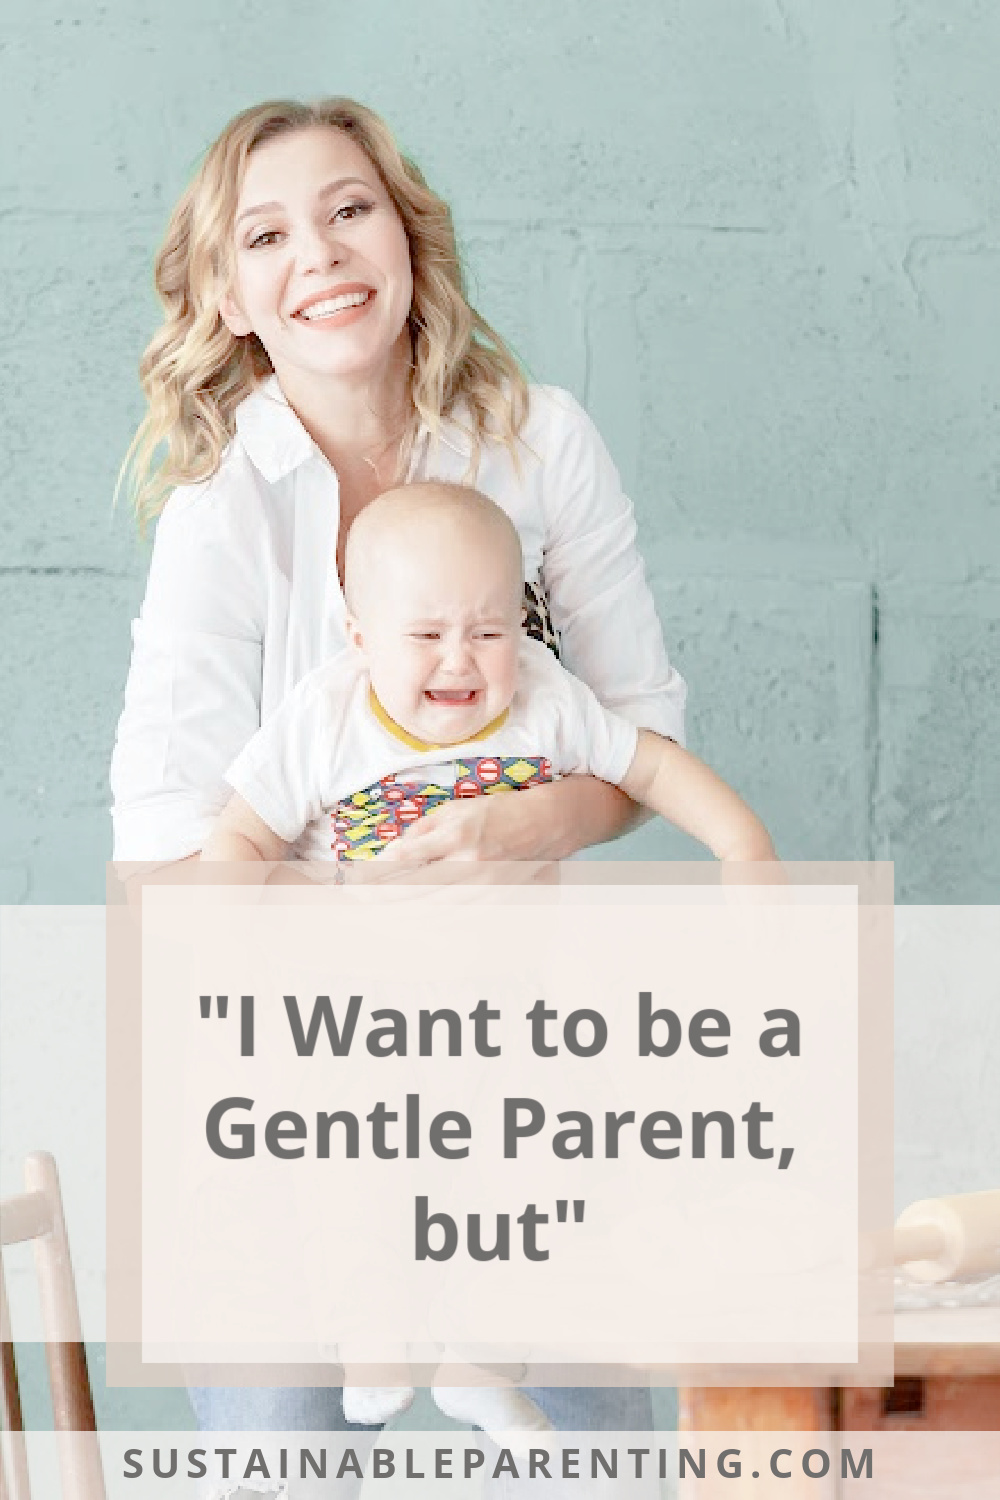 “I want to be a gentle parent, but”